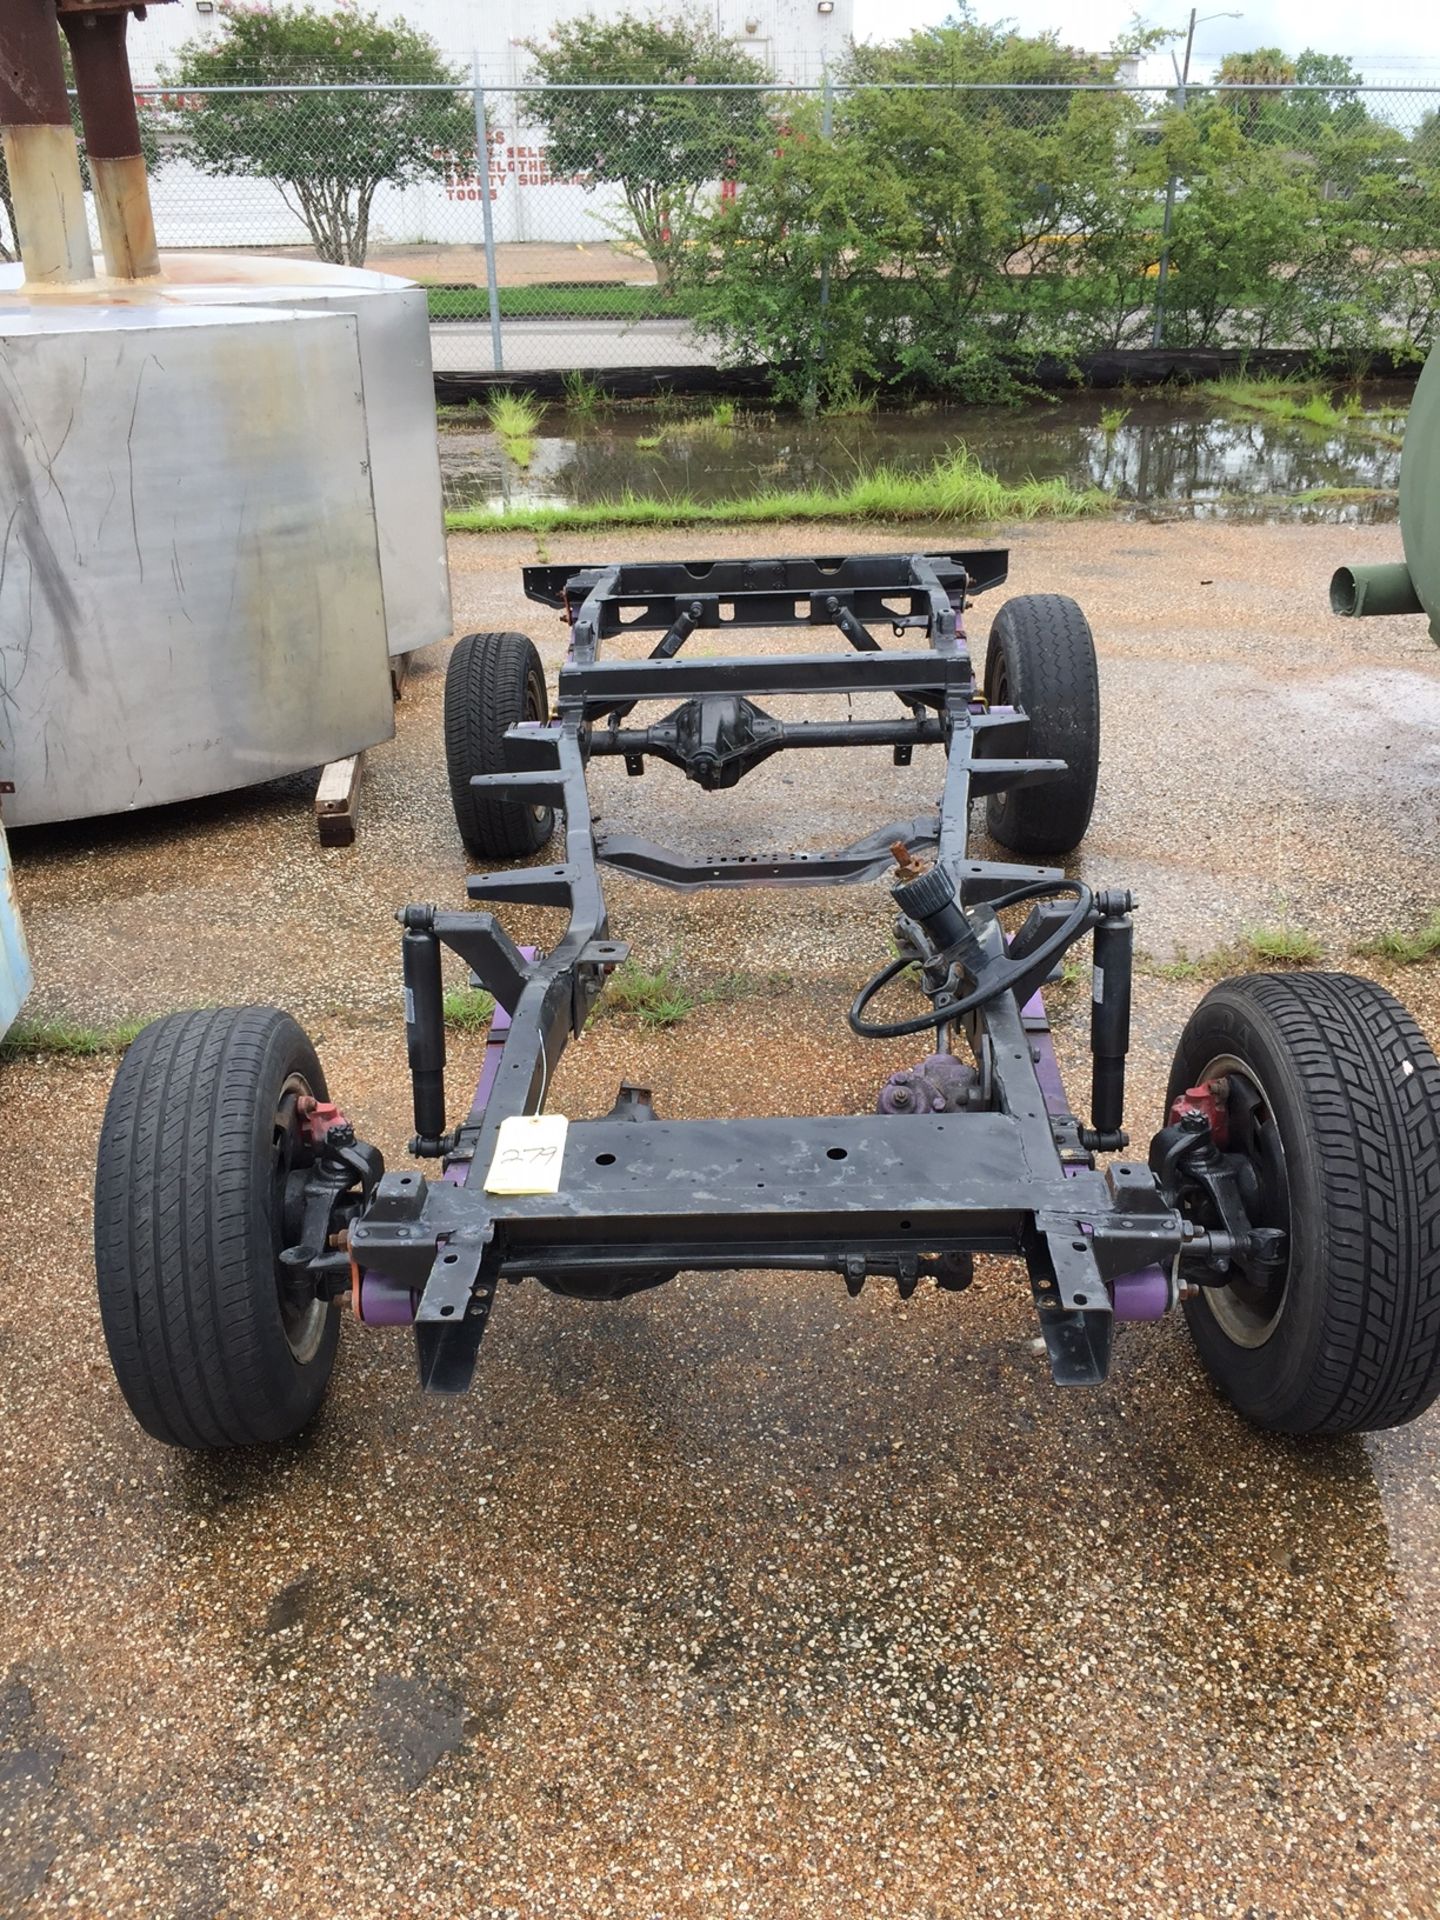 ROLLING CHASSIS, BLAZER (no title)